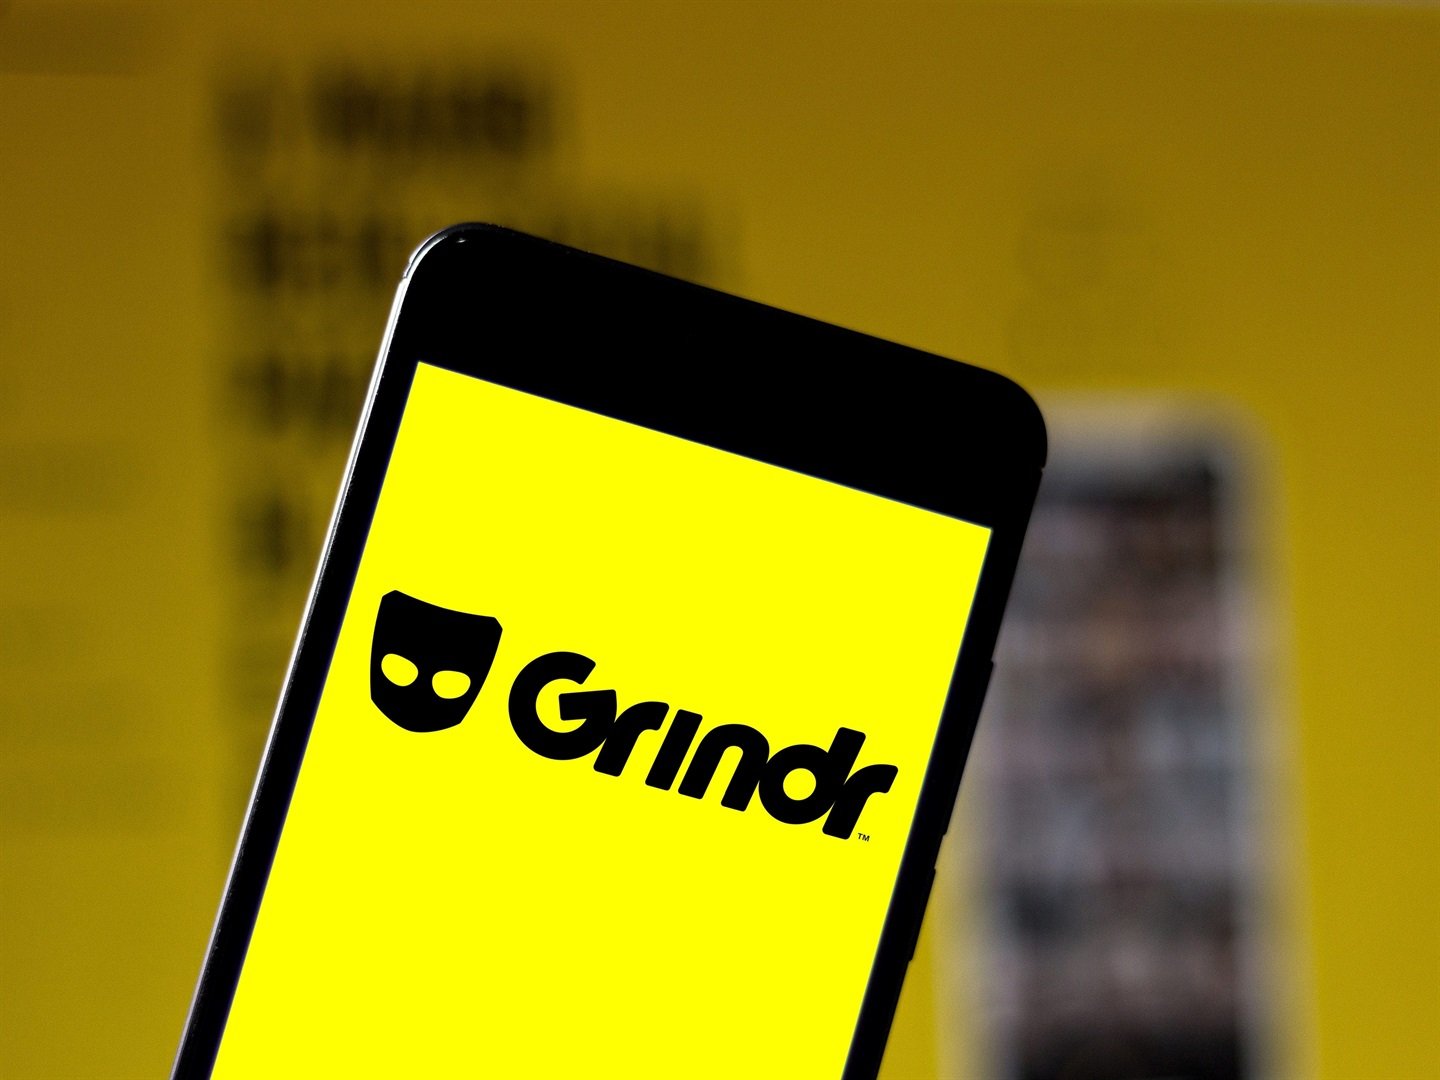 Grindr is issuing a warning to its users in Egypt as police impersonate community members to target the LGBTQ+ community.